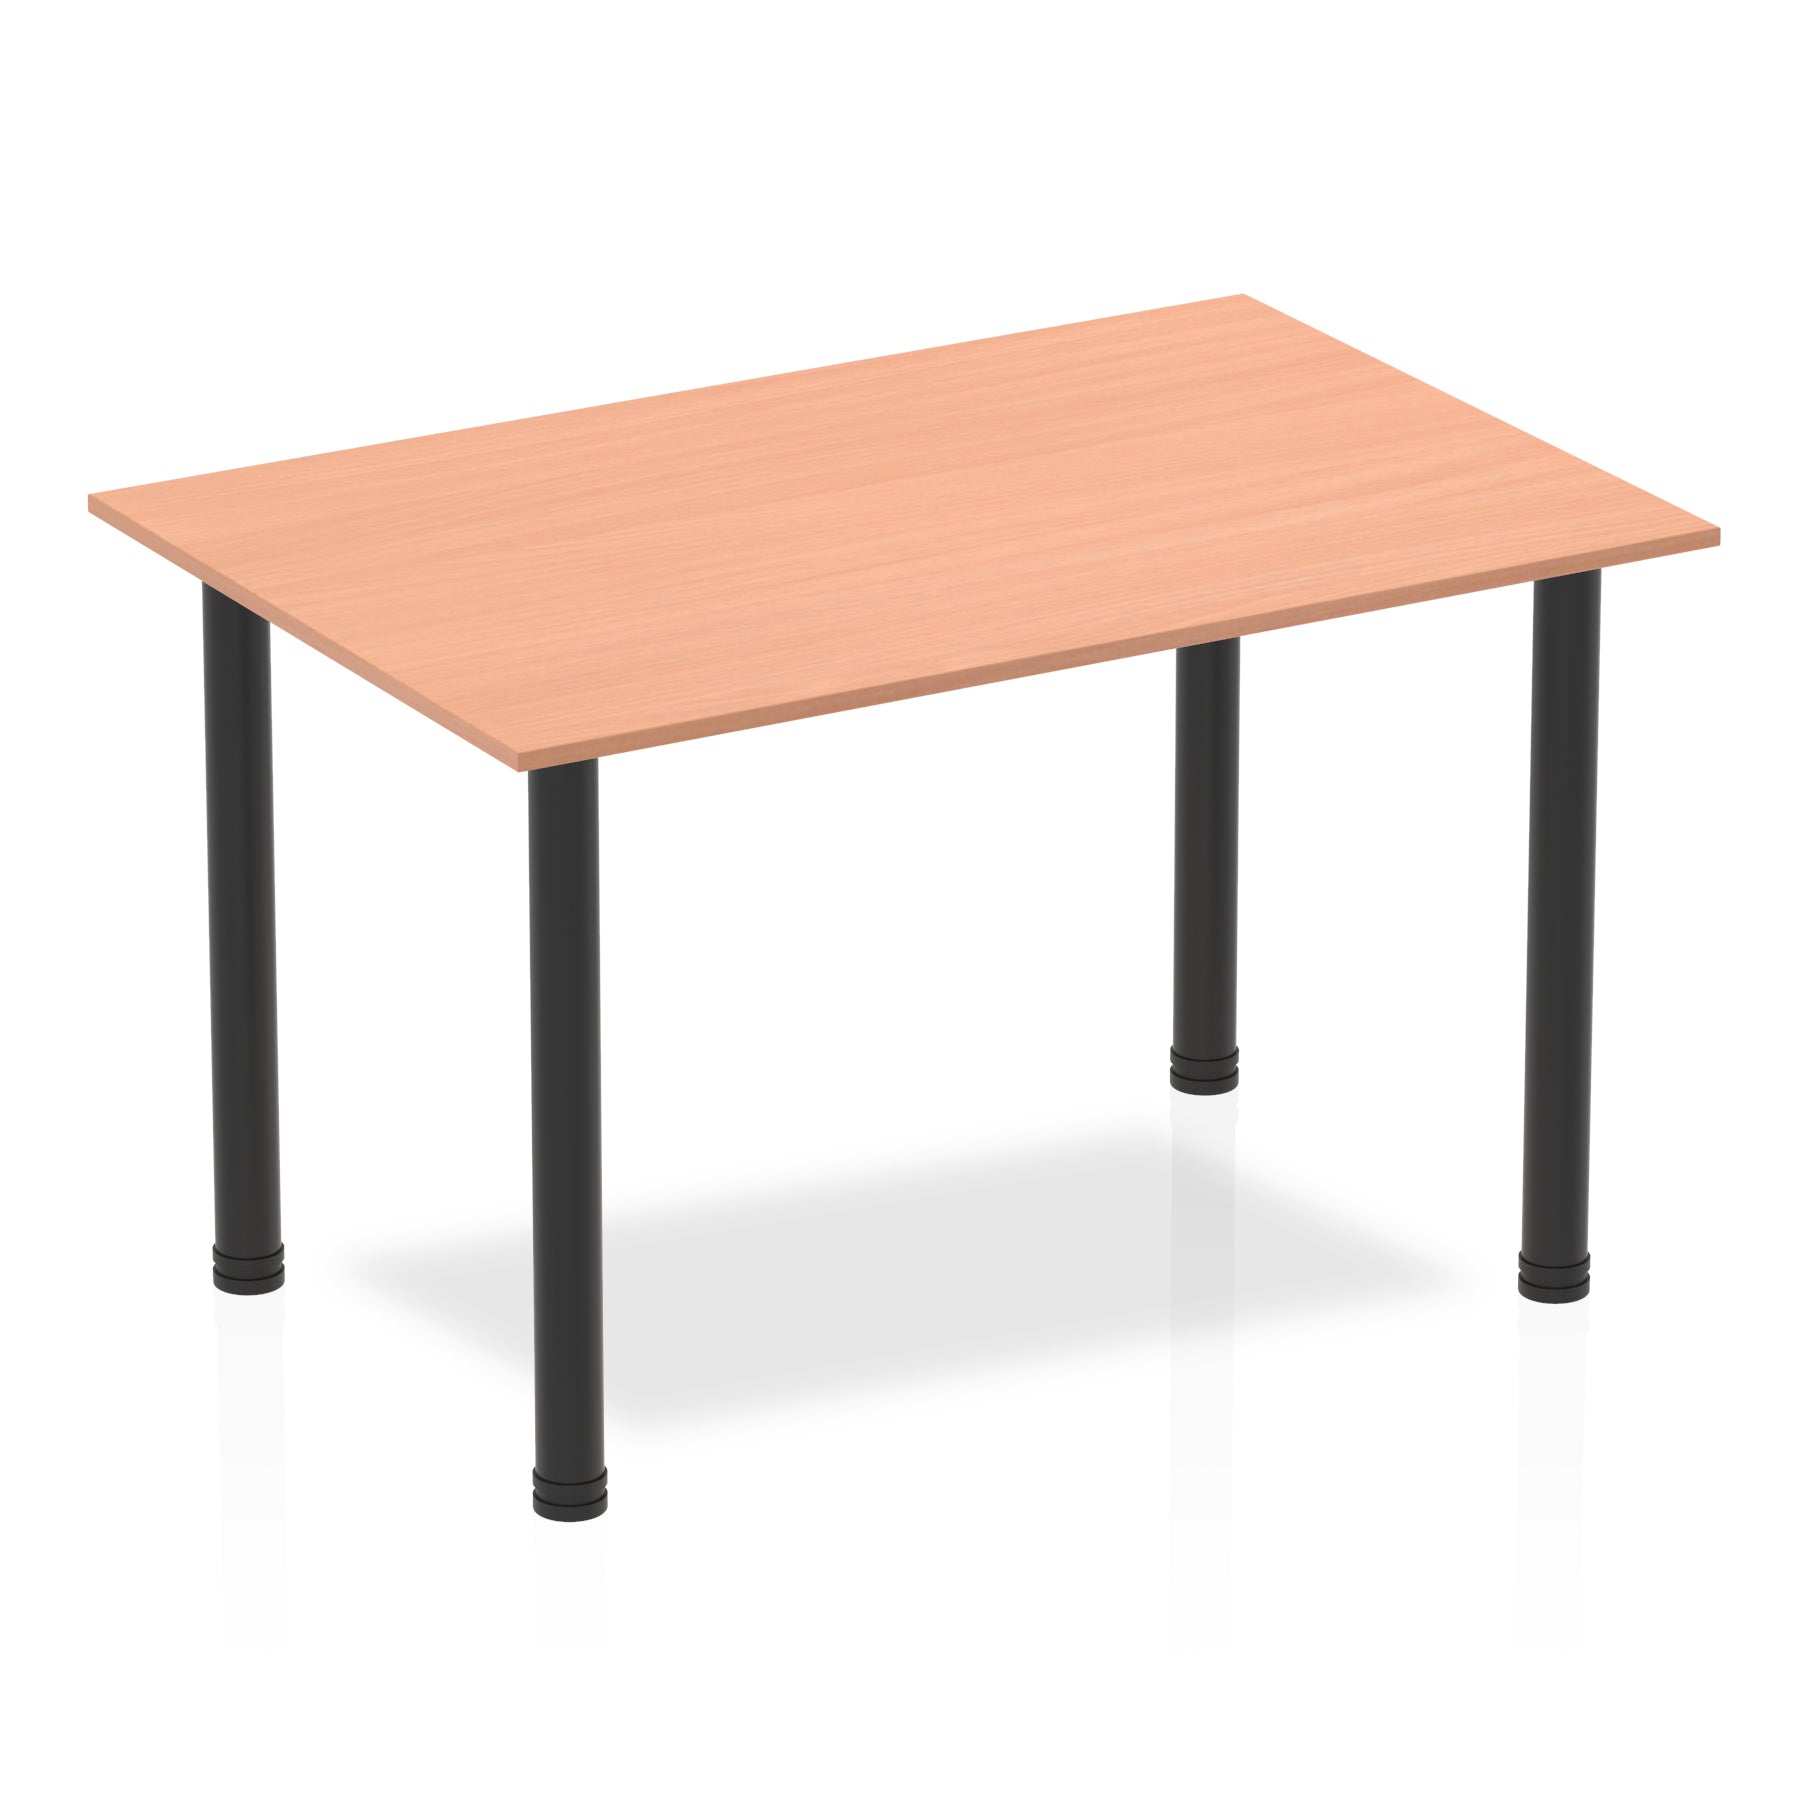 Photos - Dining Table Dynamic Office Solutions Impulse 1200mm Straight Table With Post Leg I0036 